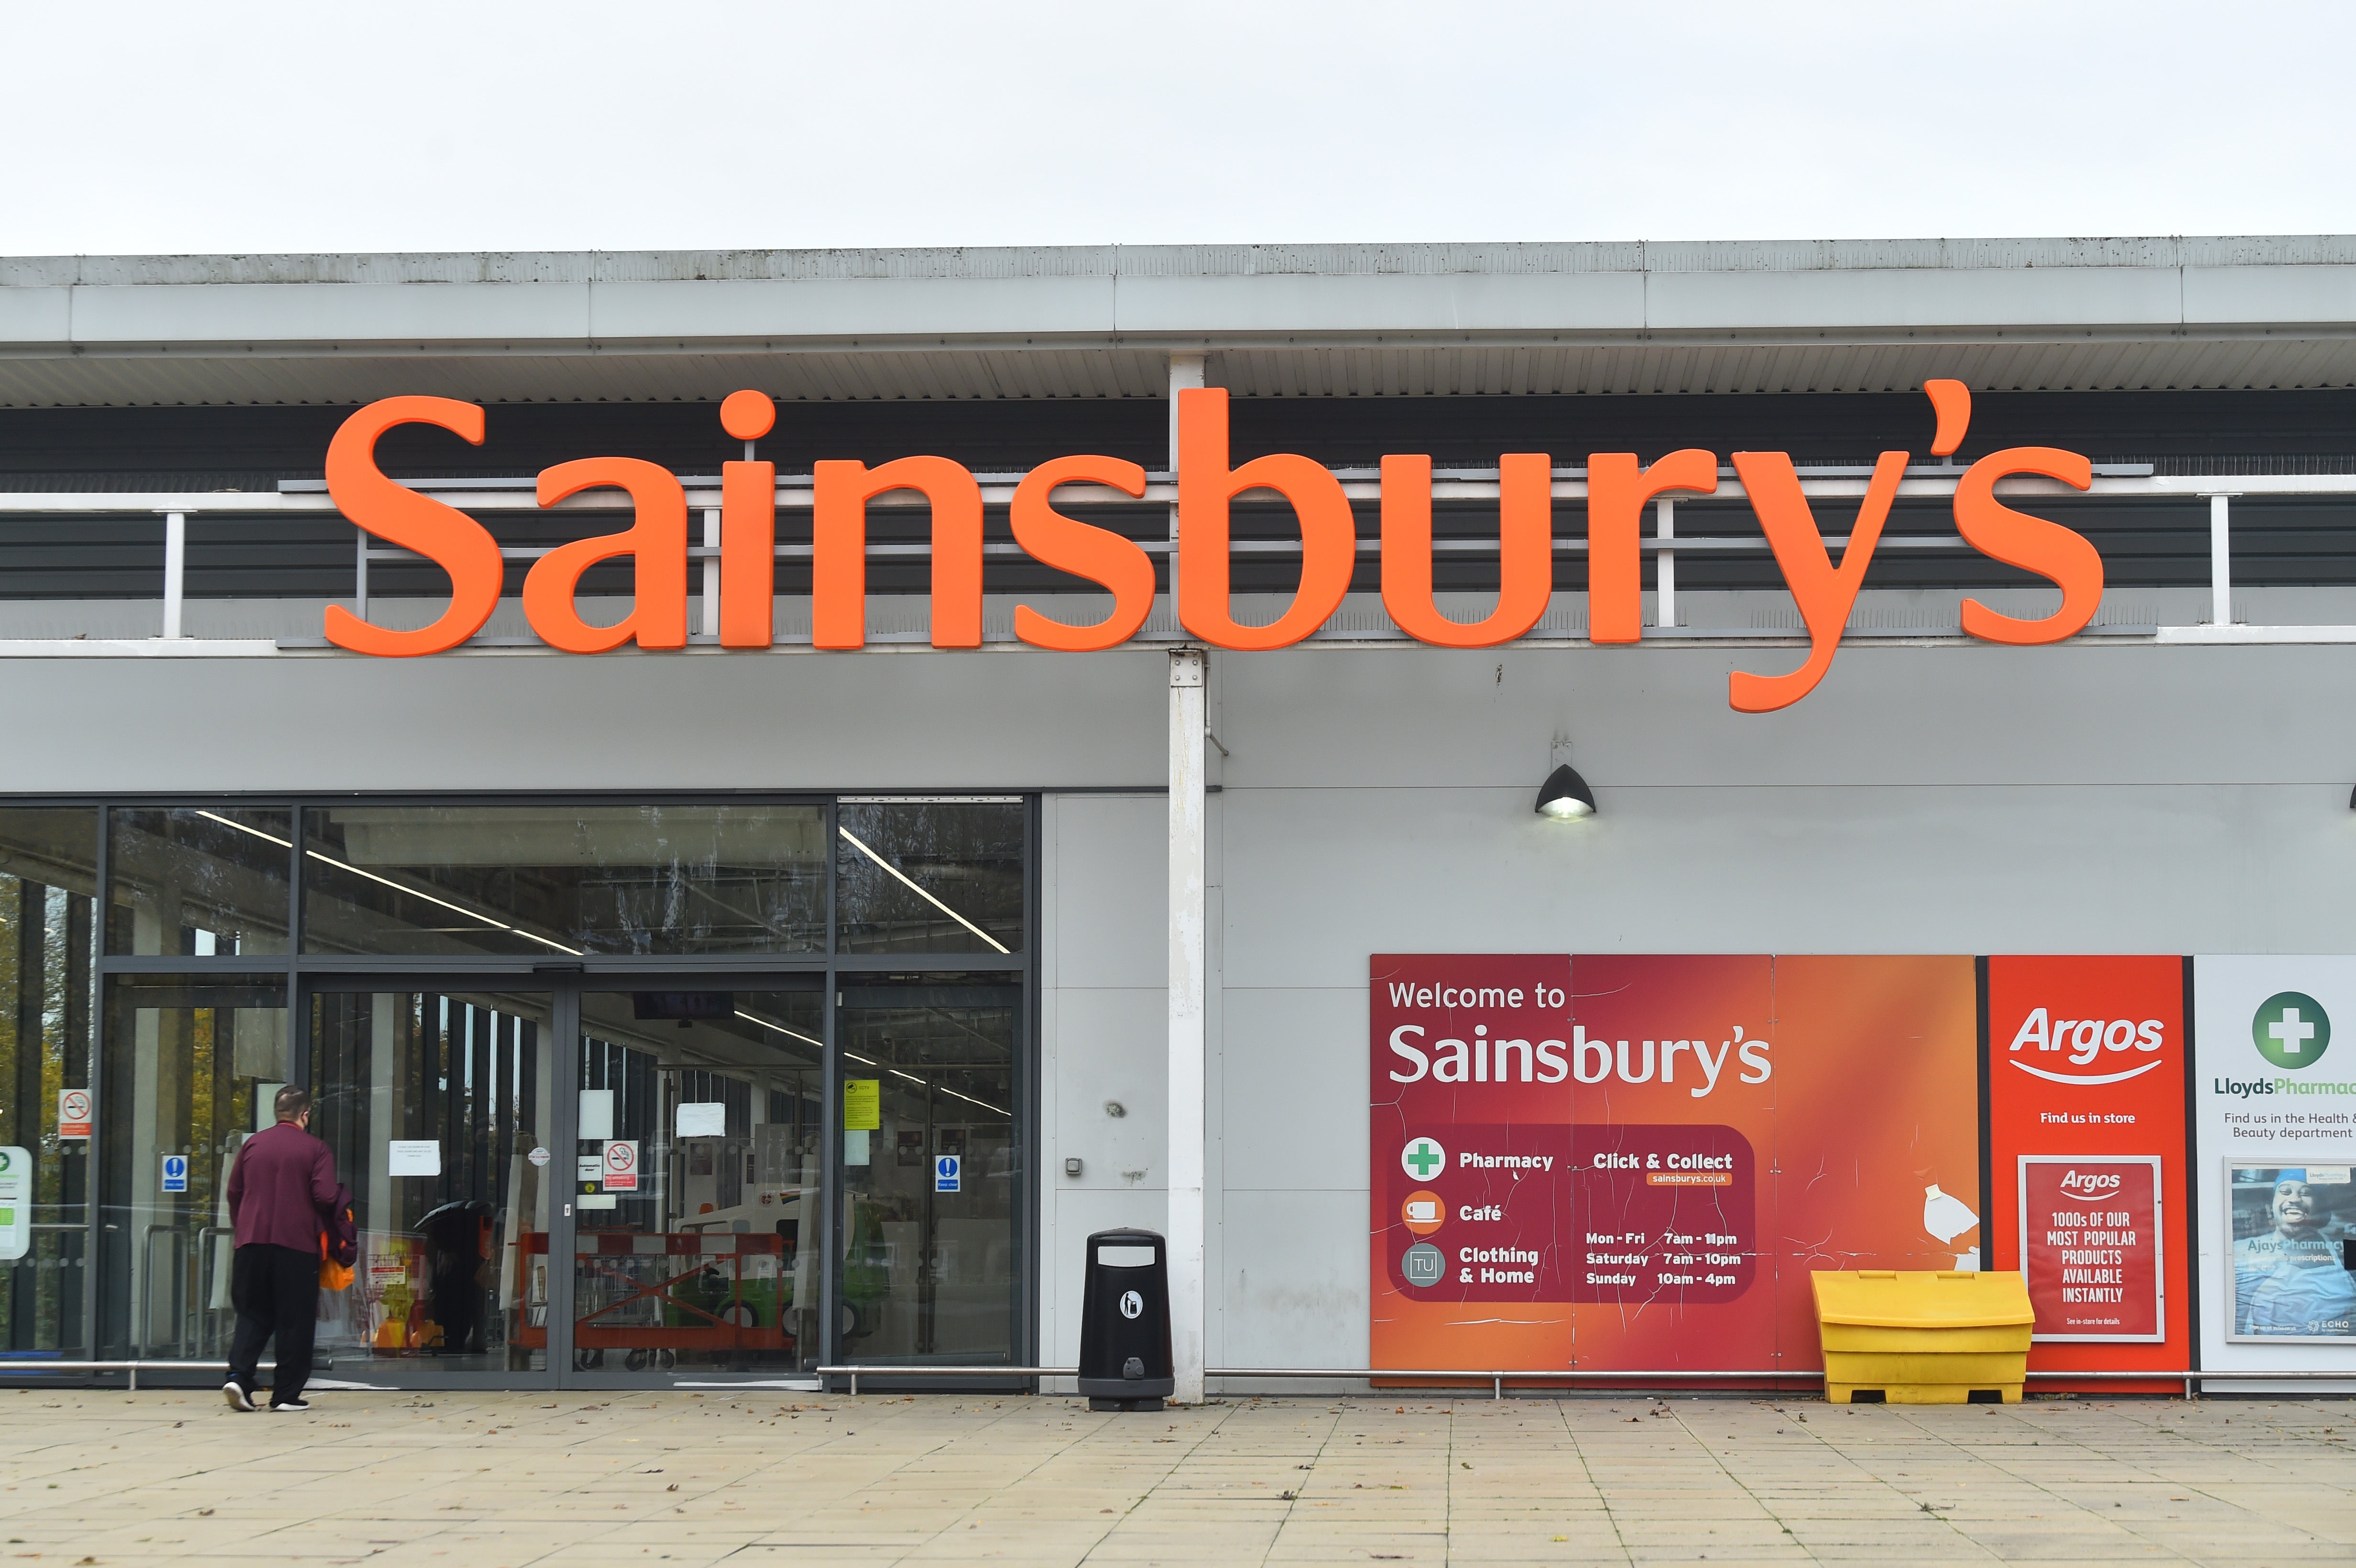 Last month, Sainsbury’s was hit by a technical problem which meant customers were unable to make contactless payments